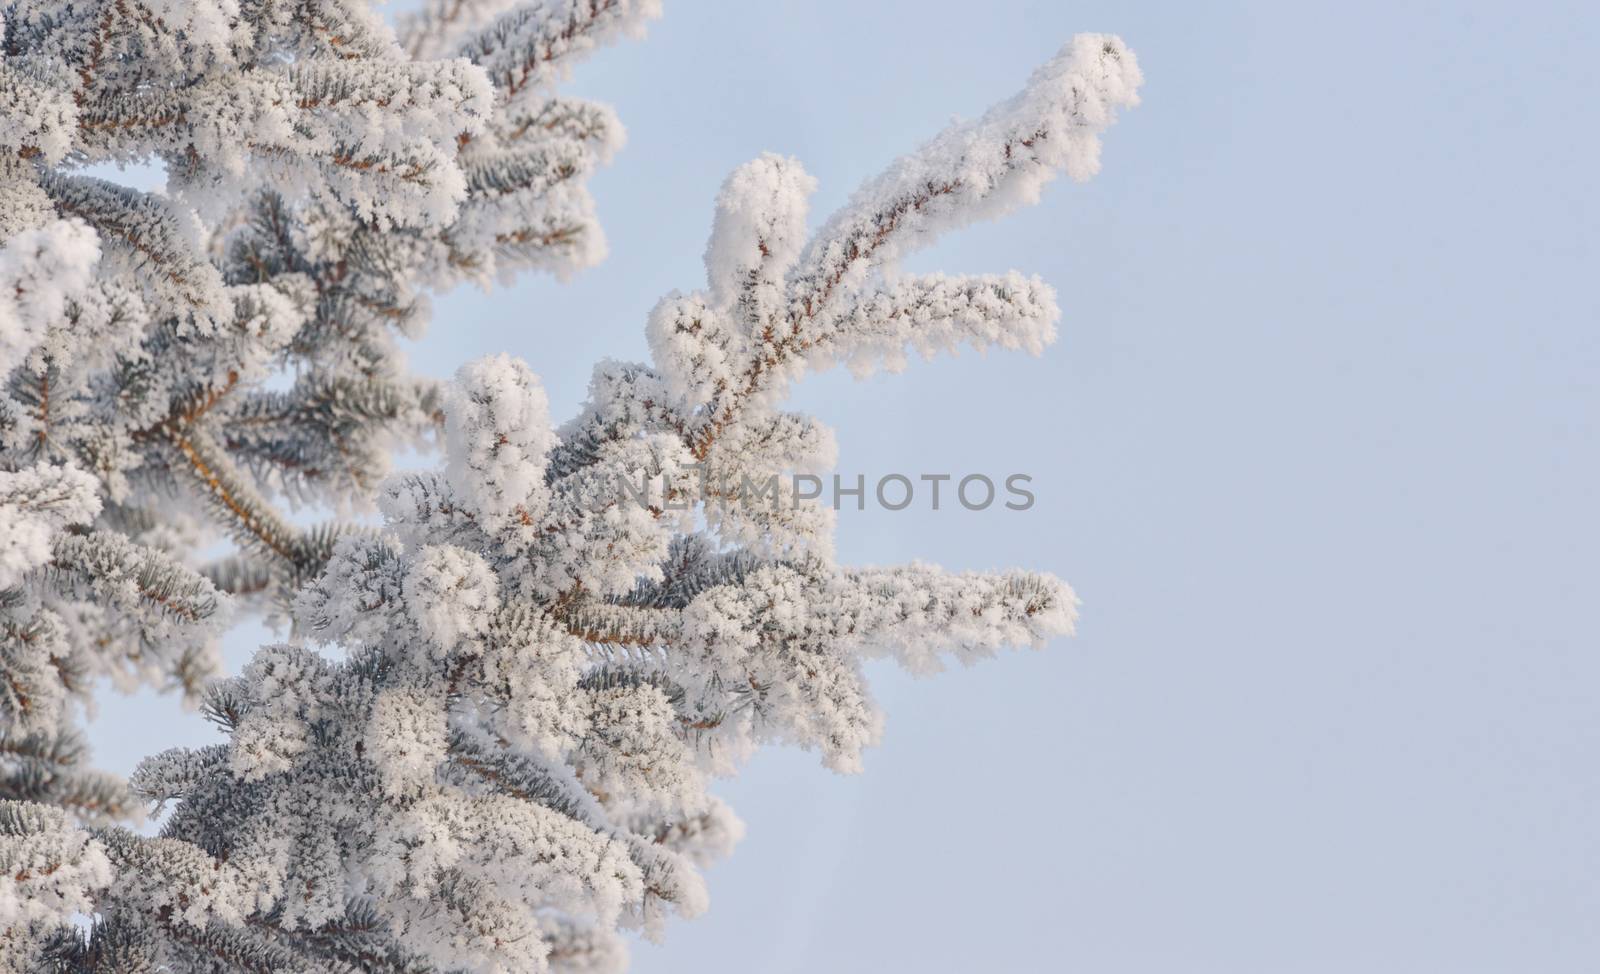 Frozen needles of pine tree and blue sky